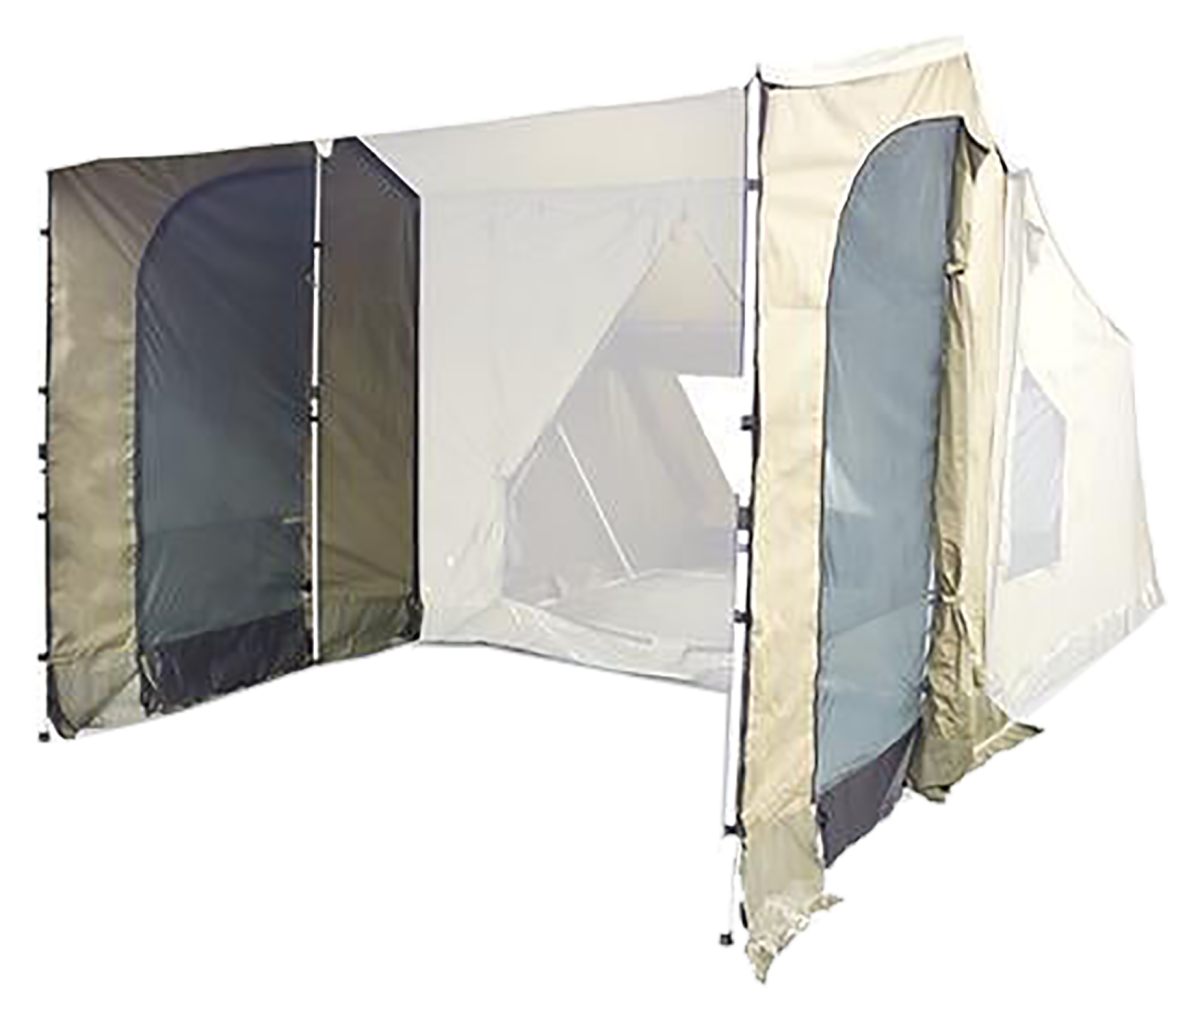 OZTENT Peaked Side Panels for RV Series Tents - Fits RV-2, 3 ,4, or 5